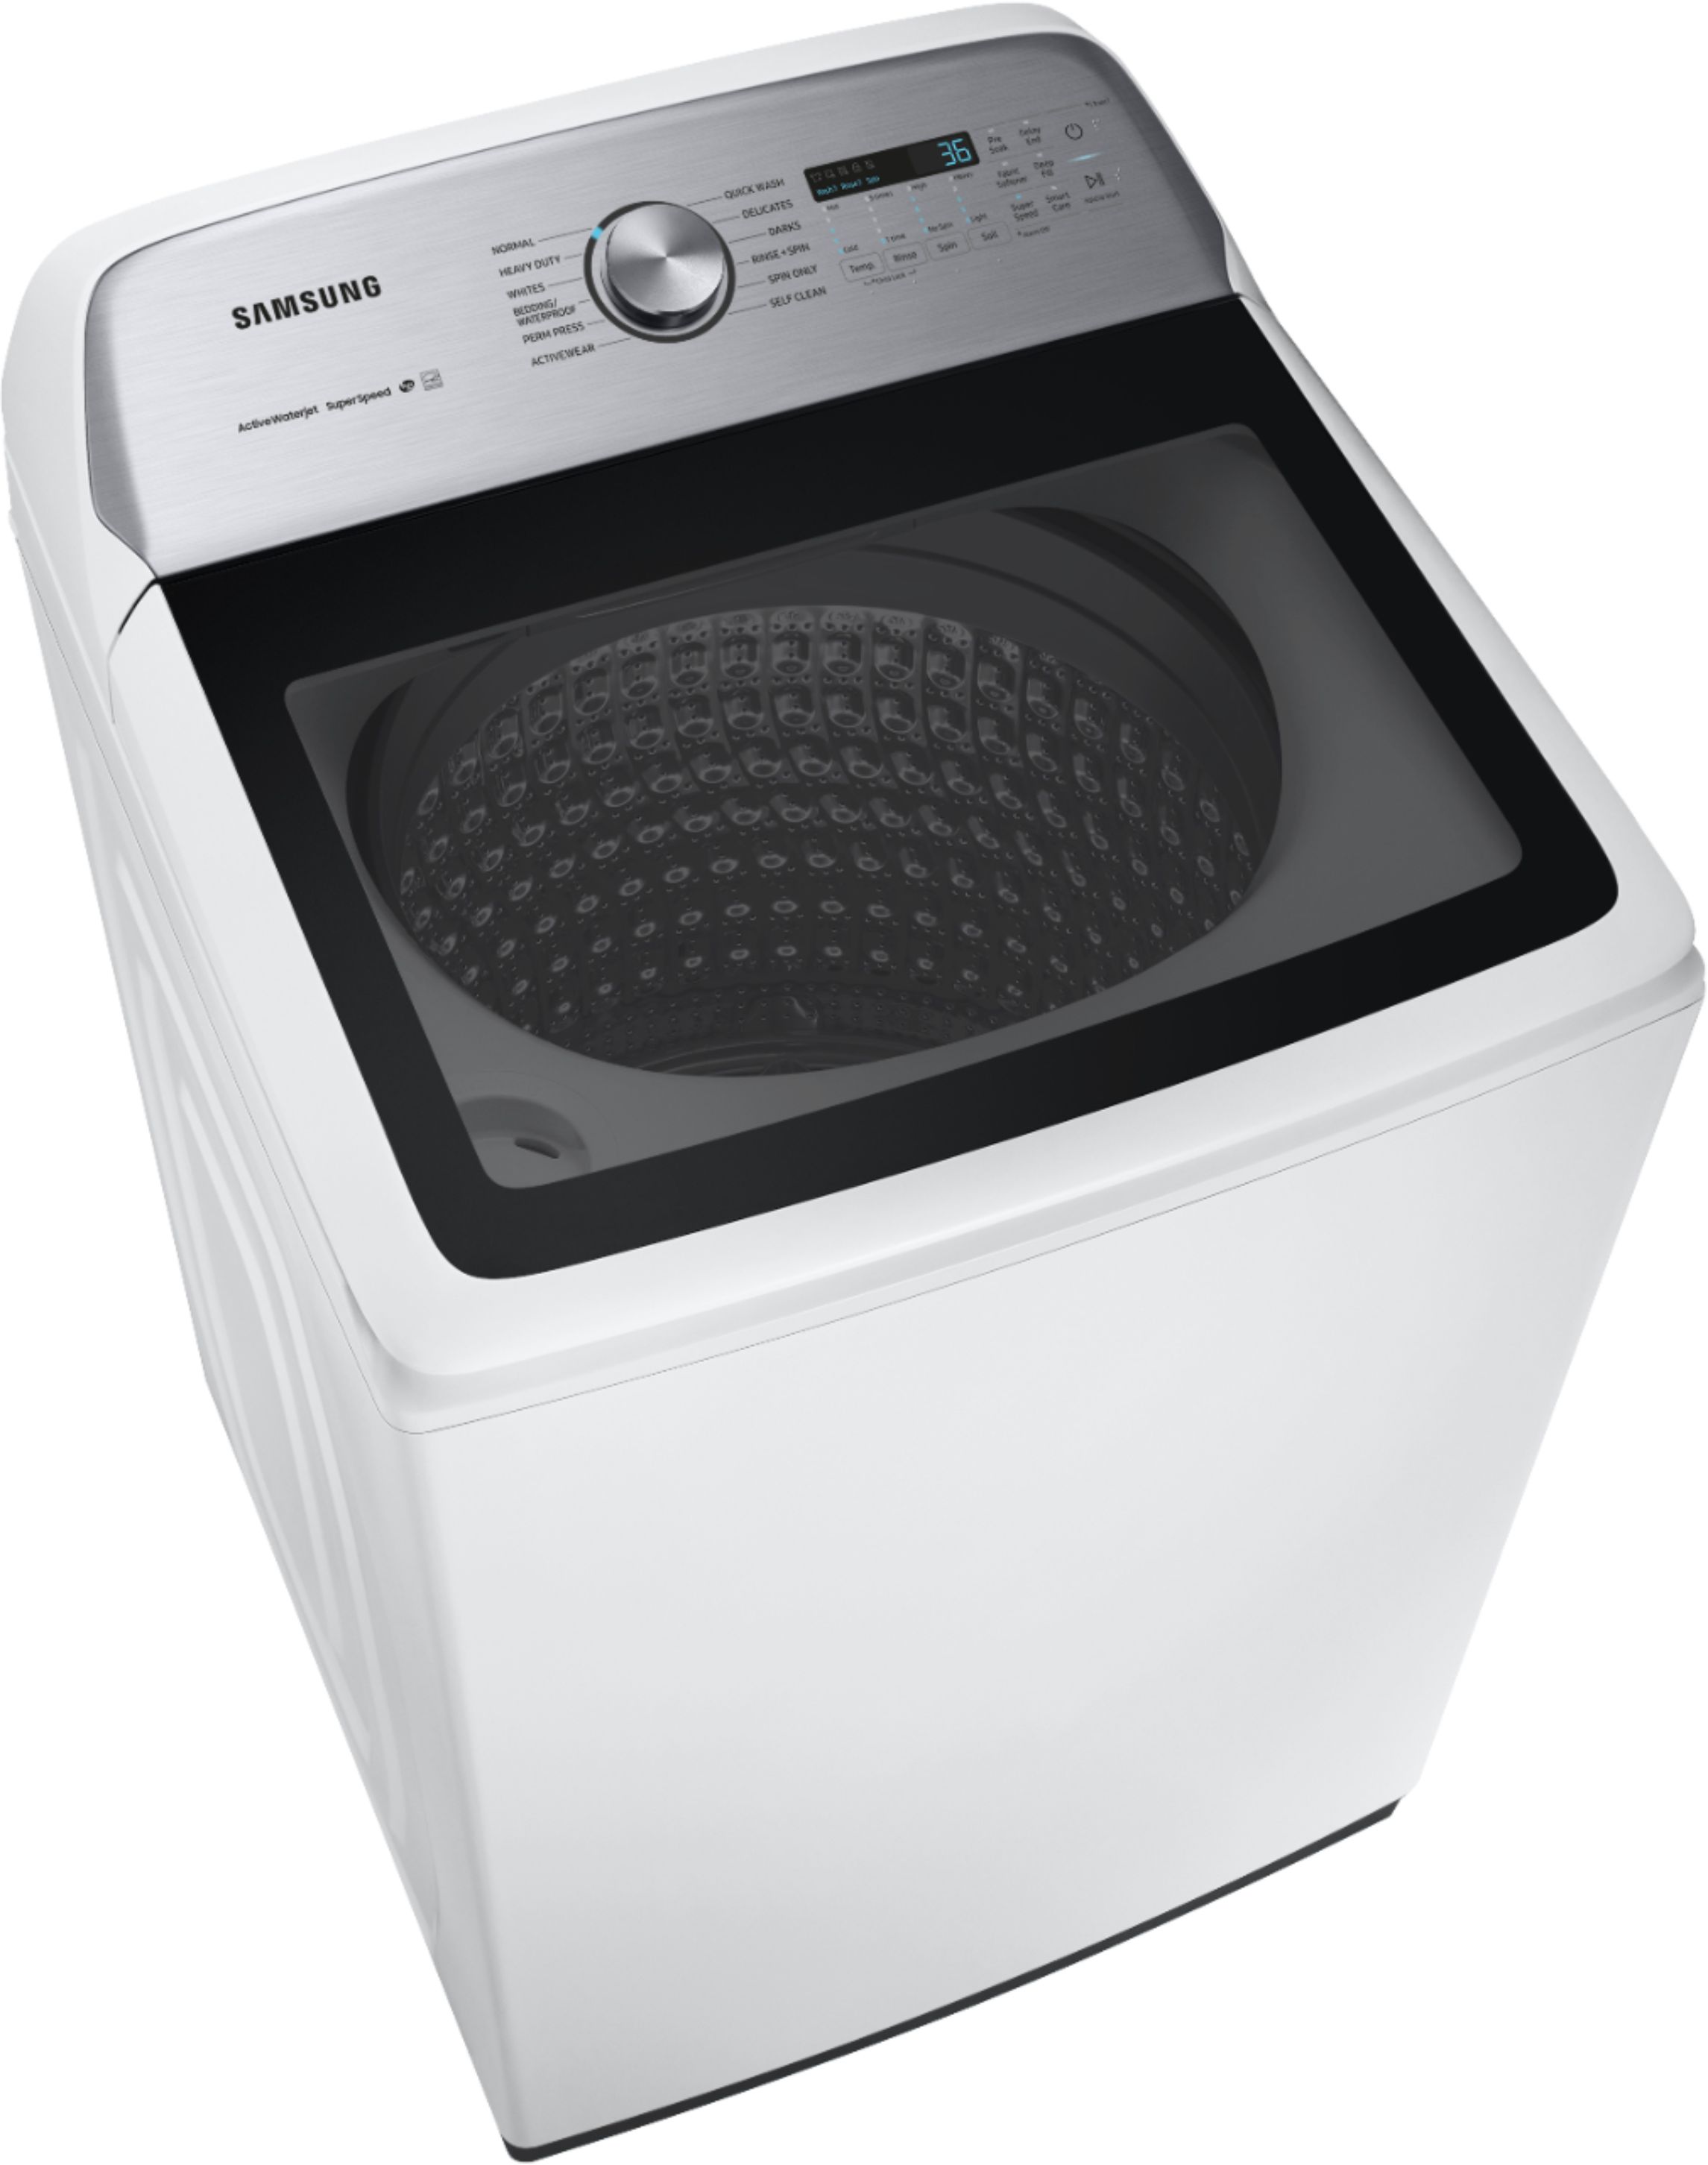 Samsung 5.0 Cu. Ft. High-Efficiency Top Load Washer with Active WaterJet  White WA50R5200AW/US - Best Buy